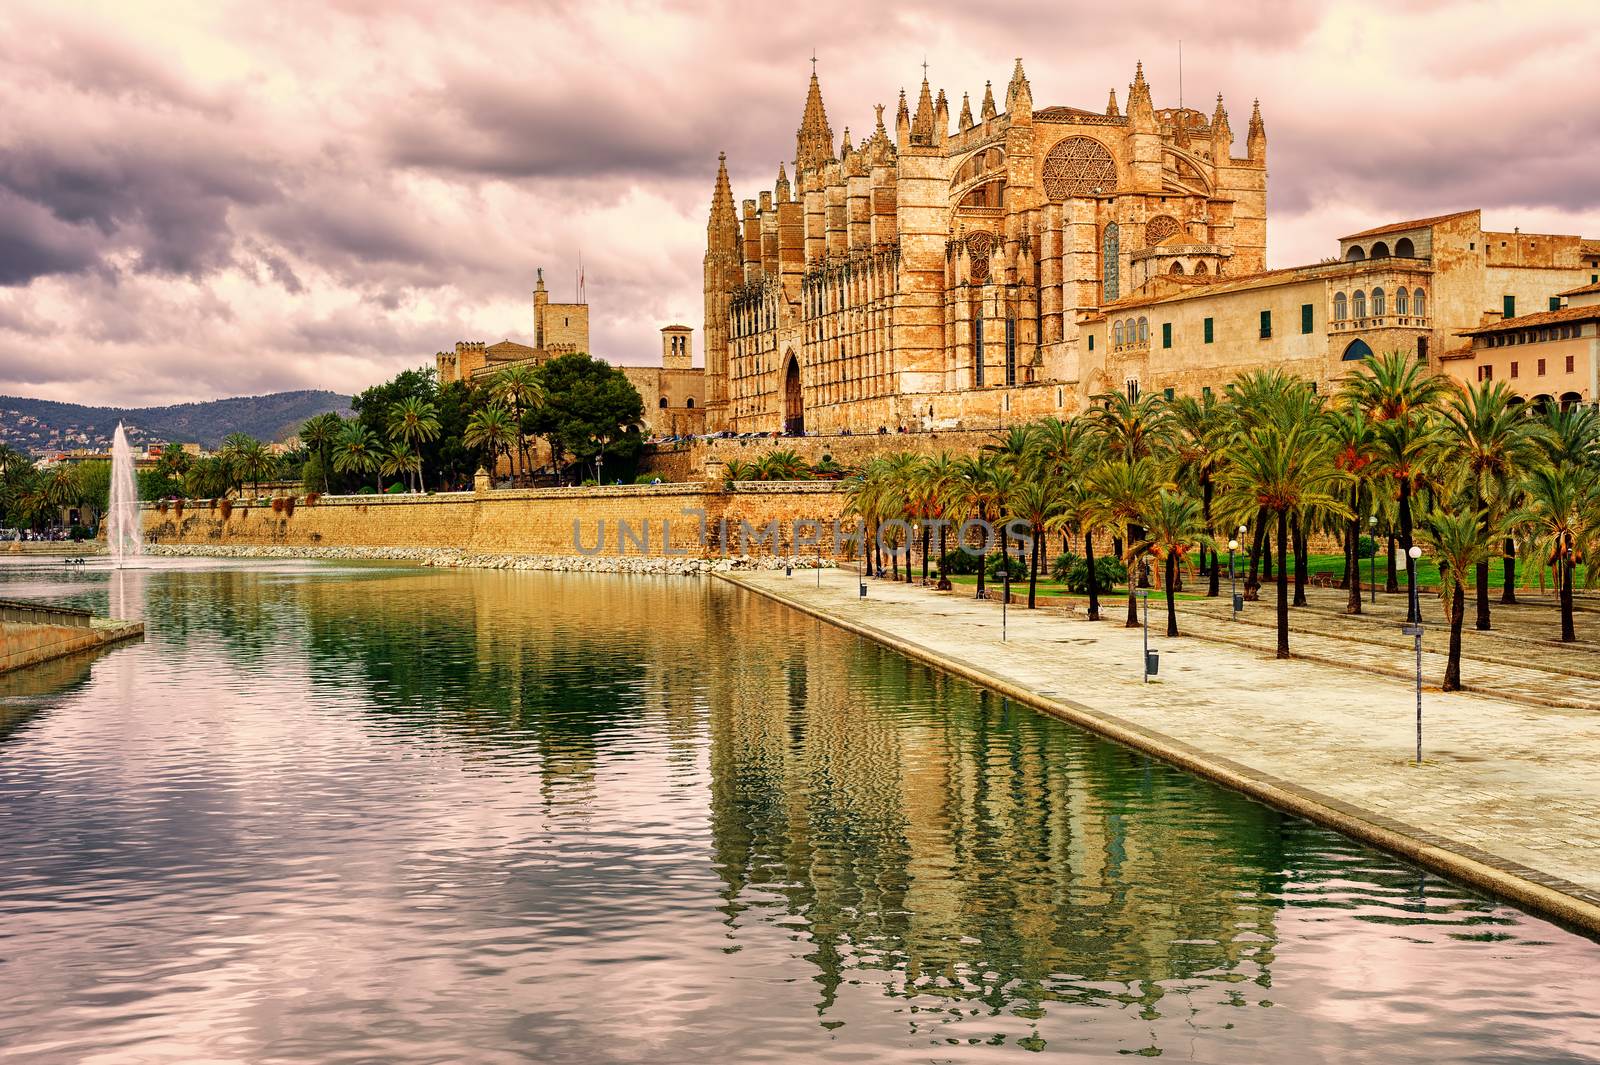 La Seu, the cathedral of Palma de Mallorca, Spain, in sunset light by GlobePhotos